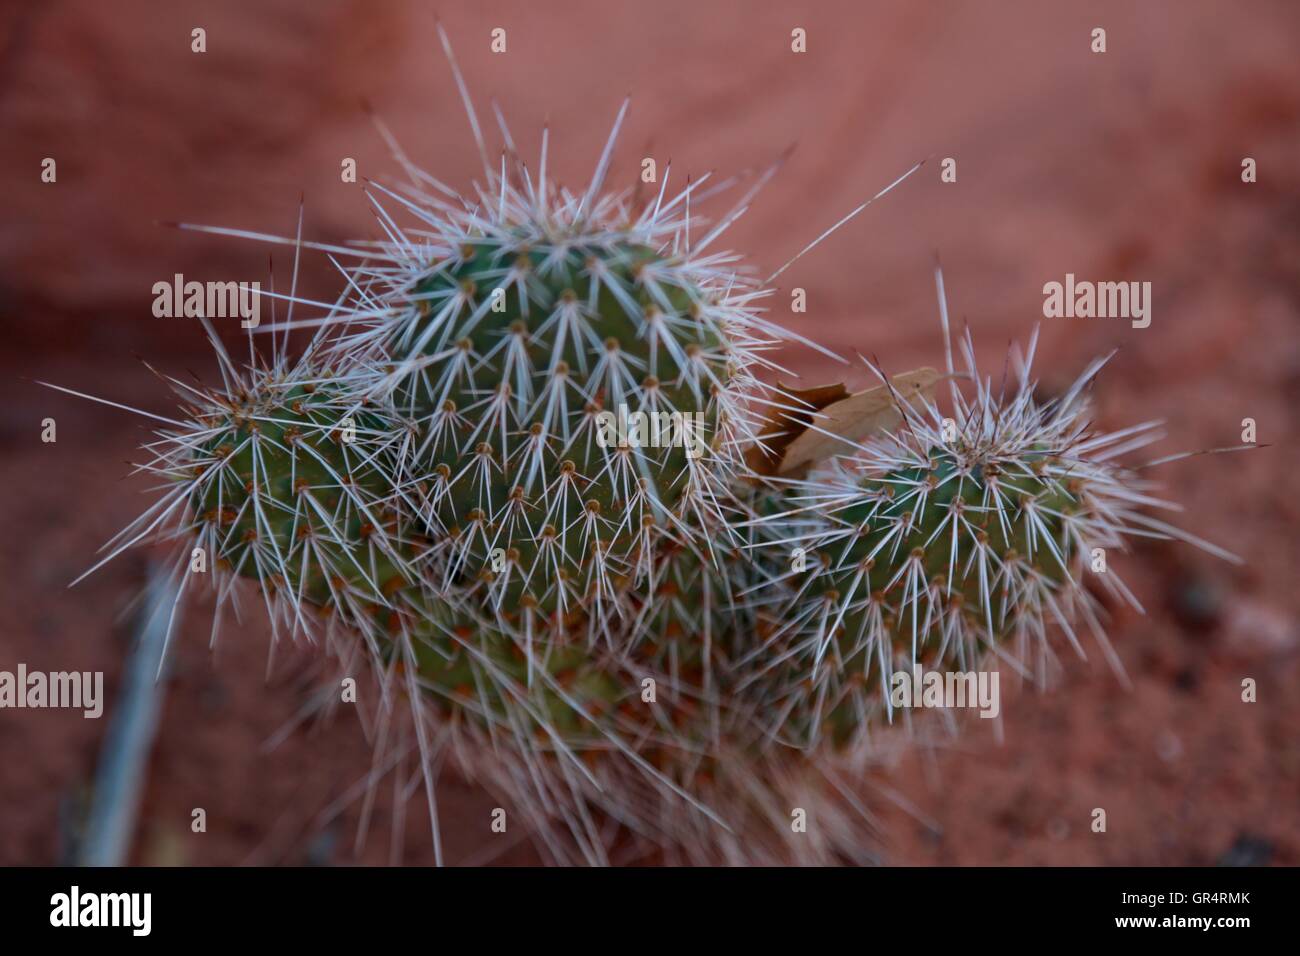 Shallow focus on a prickly, little cactus. Stock Photo